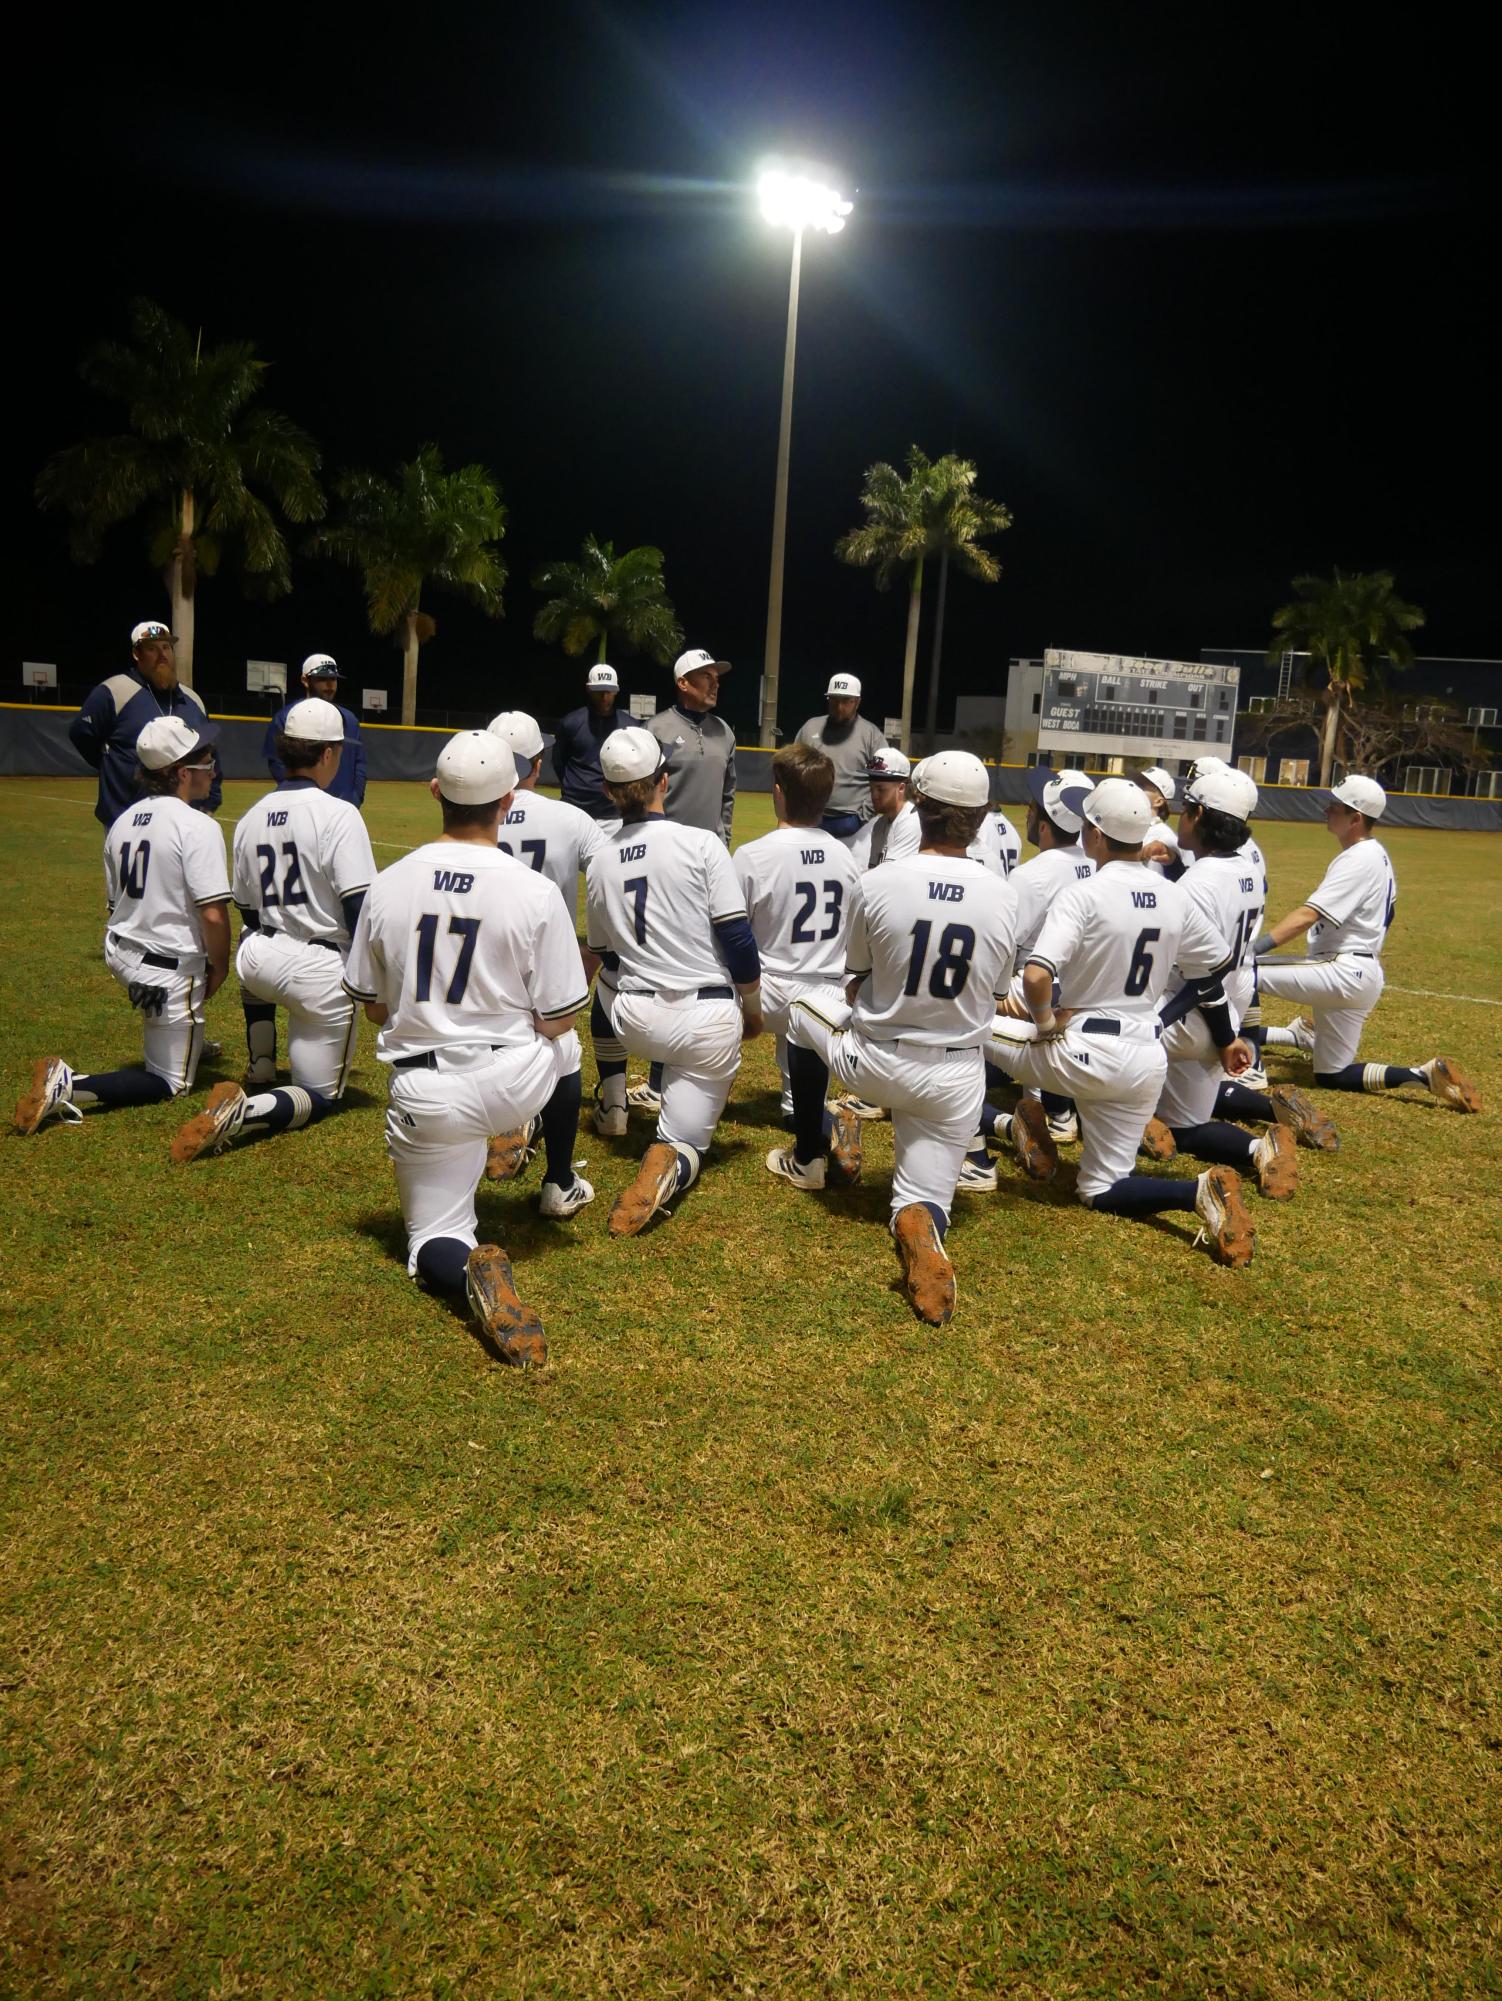 West Boca Bulls Rout Palm Beach Gardens 19-2 with Impressive Performances in Opening Game